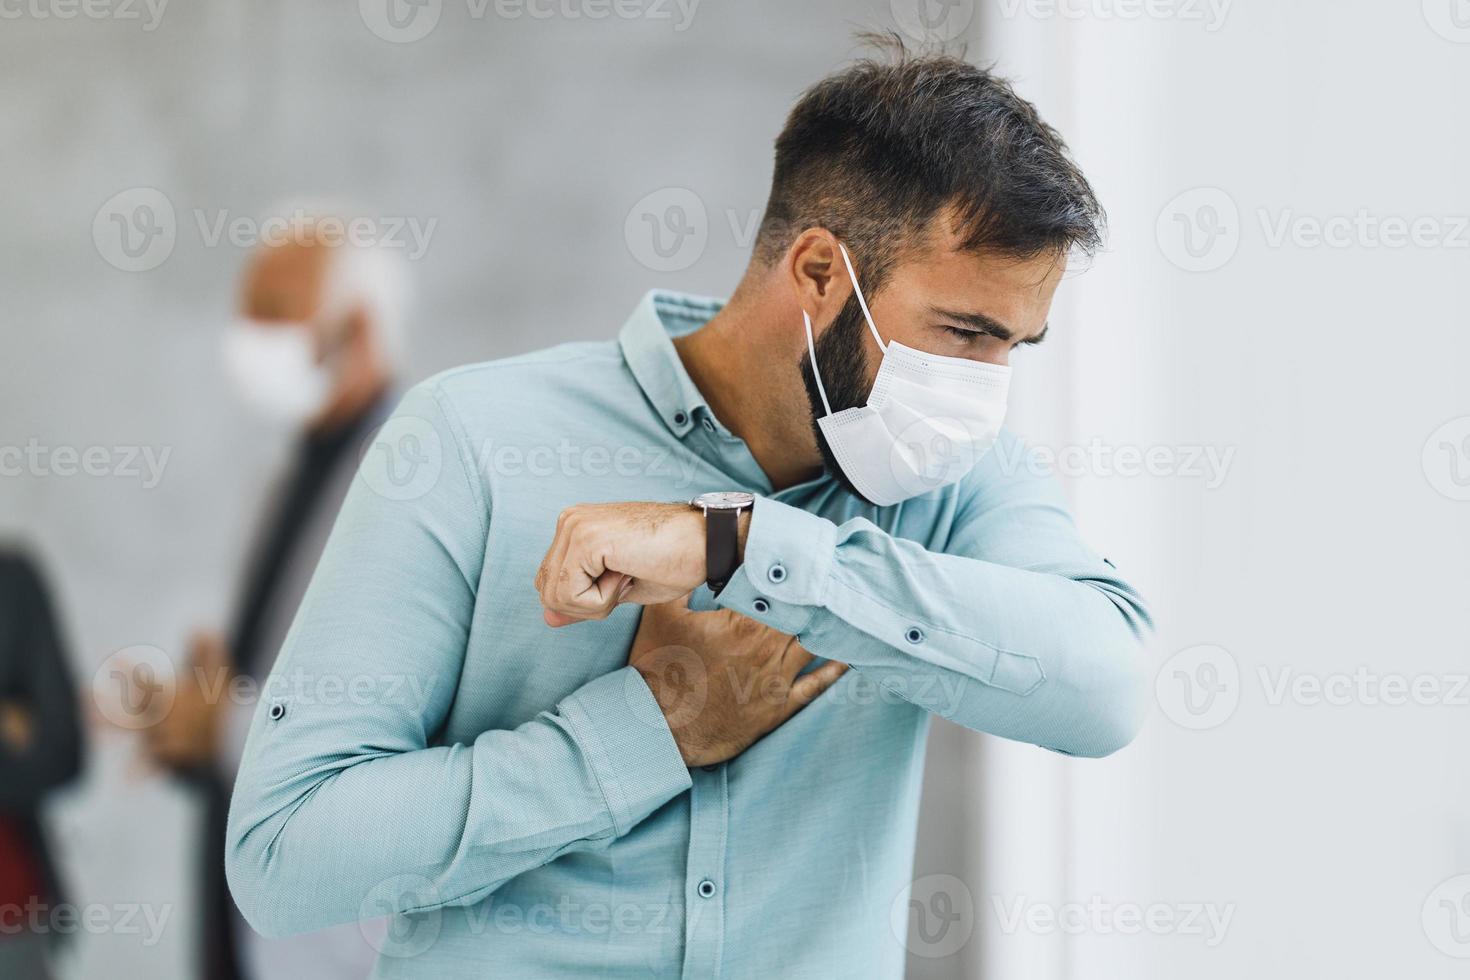 A Business Man With Protective Mask Coughs At The Elbow During Coronavirus Pandemic photo